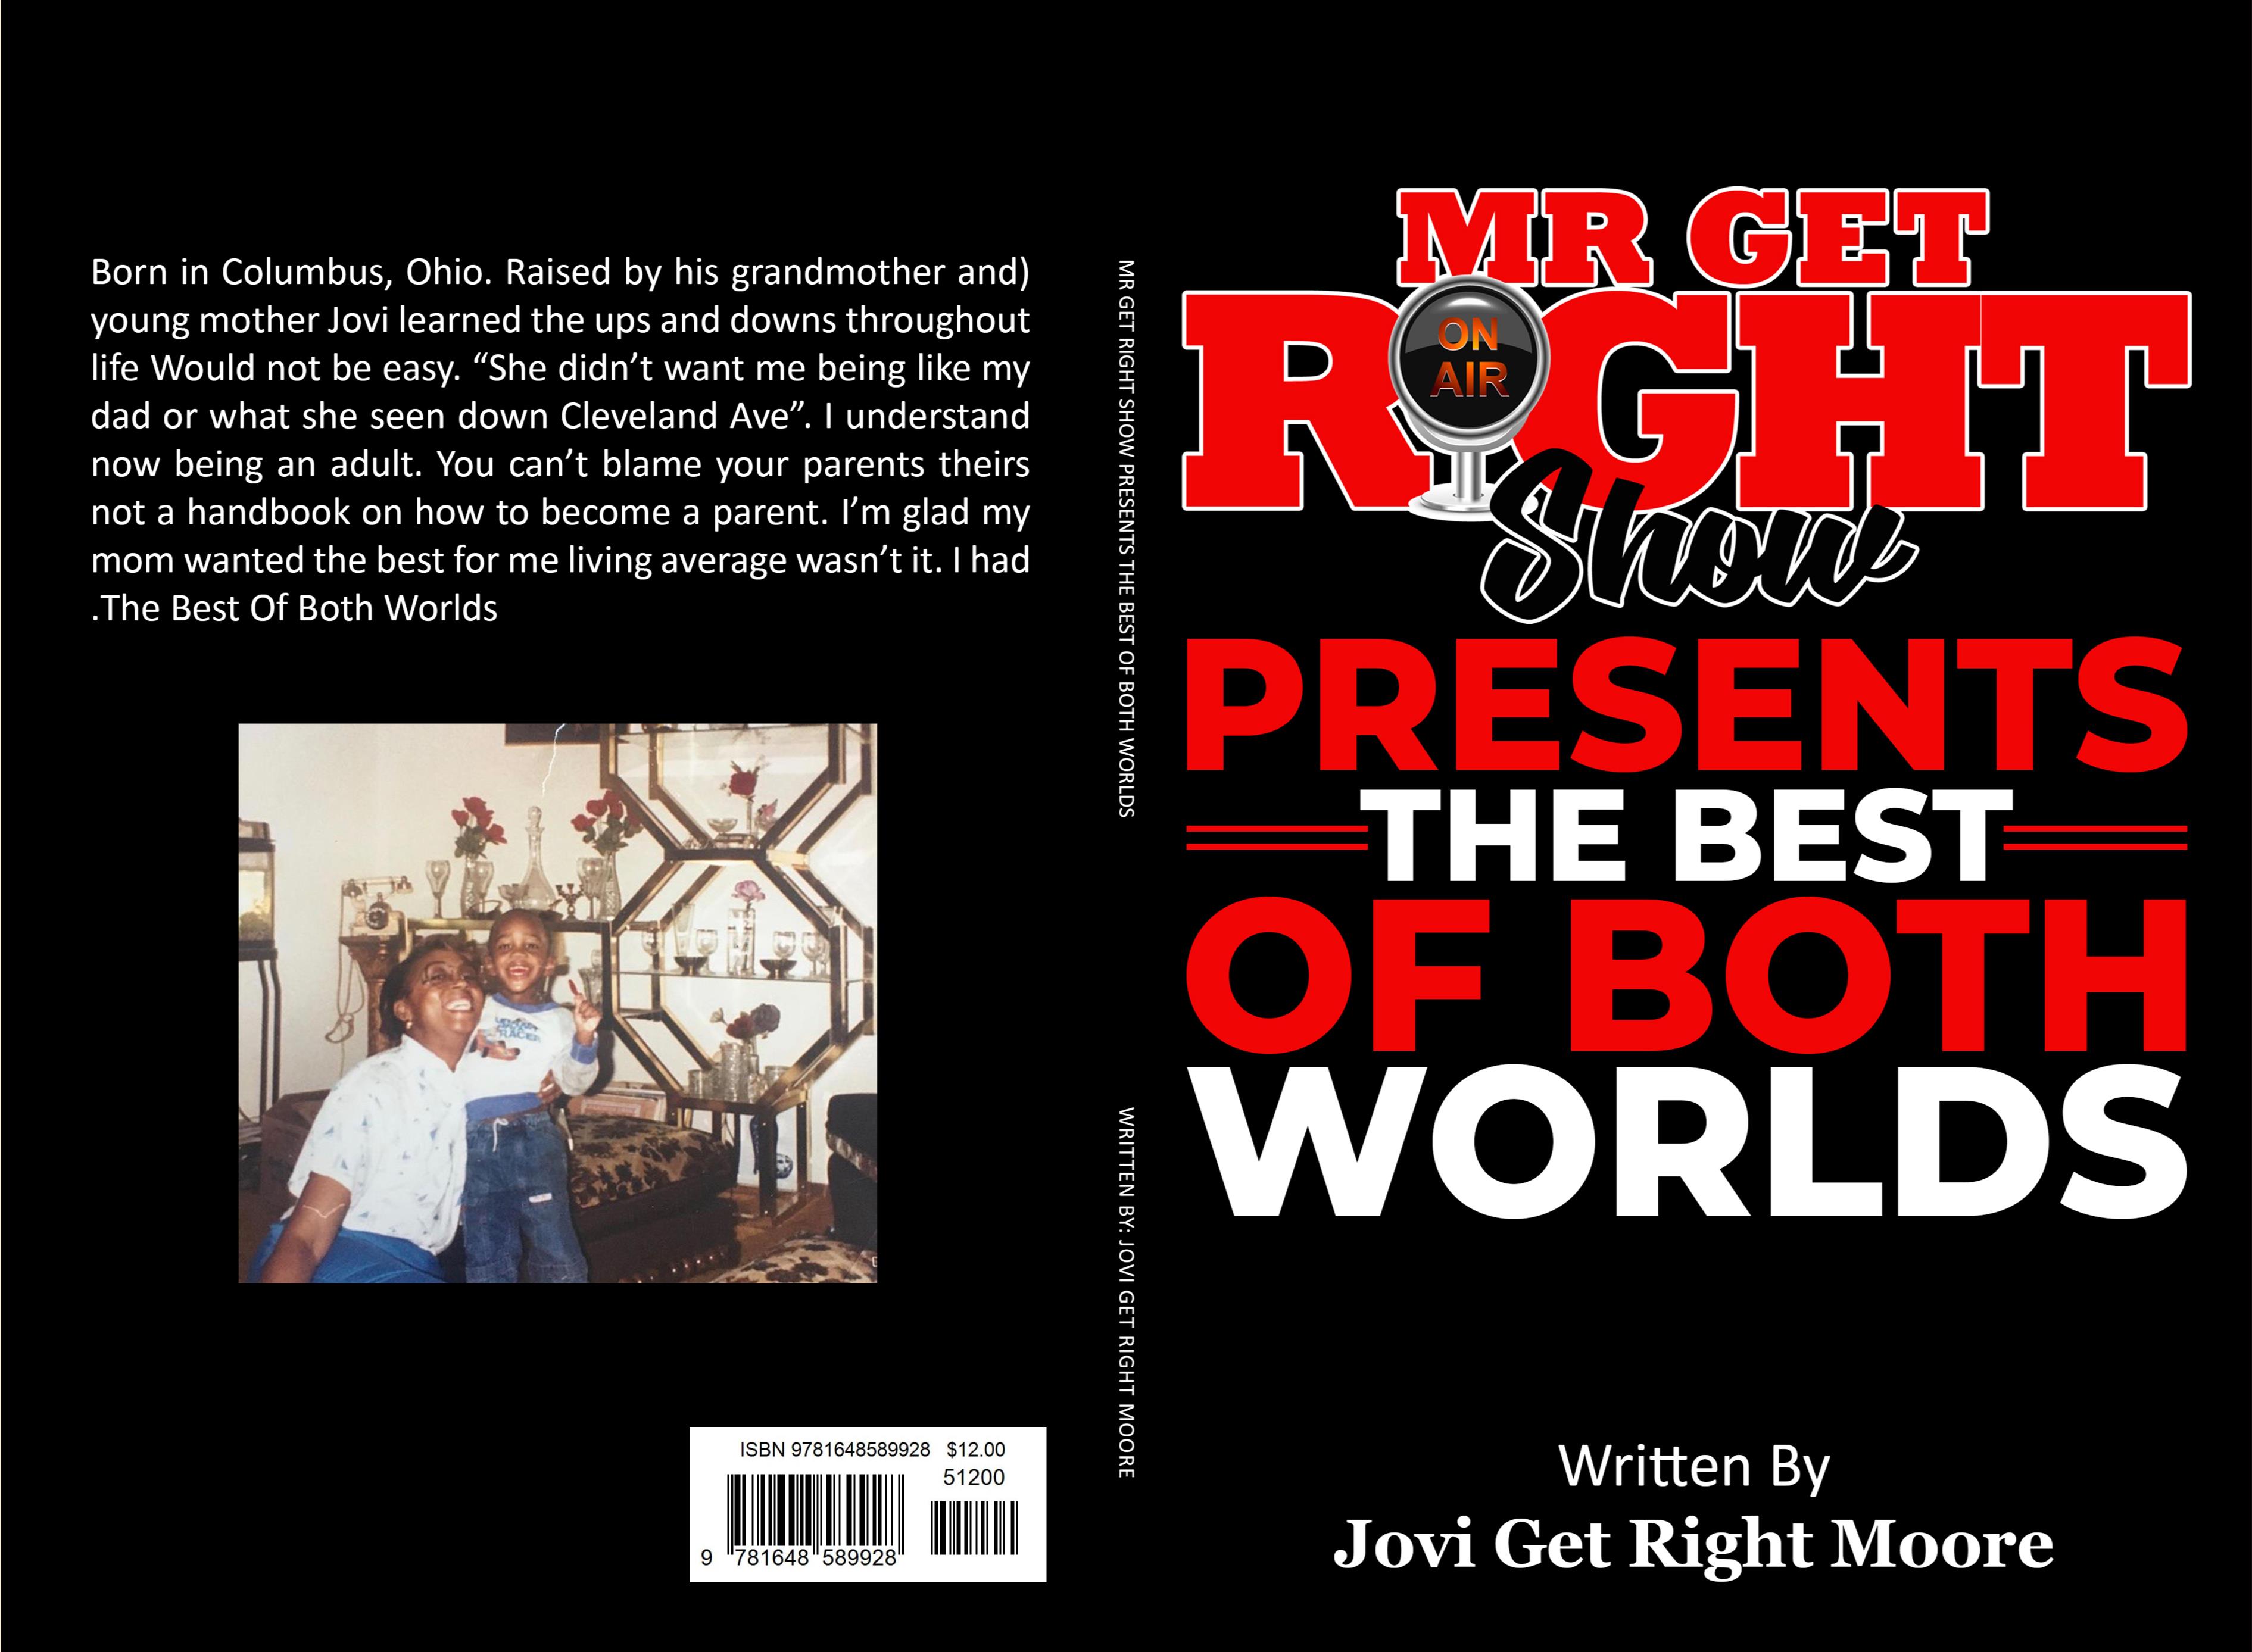 The Mr. Get Right Show Presents The Best Of Both Worlds  cover image